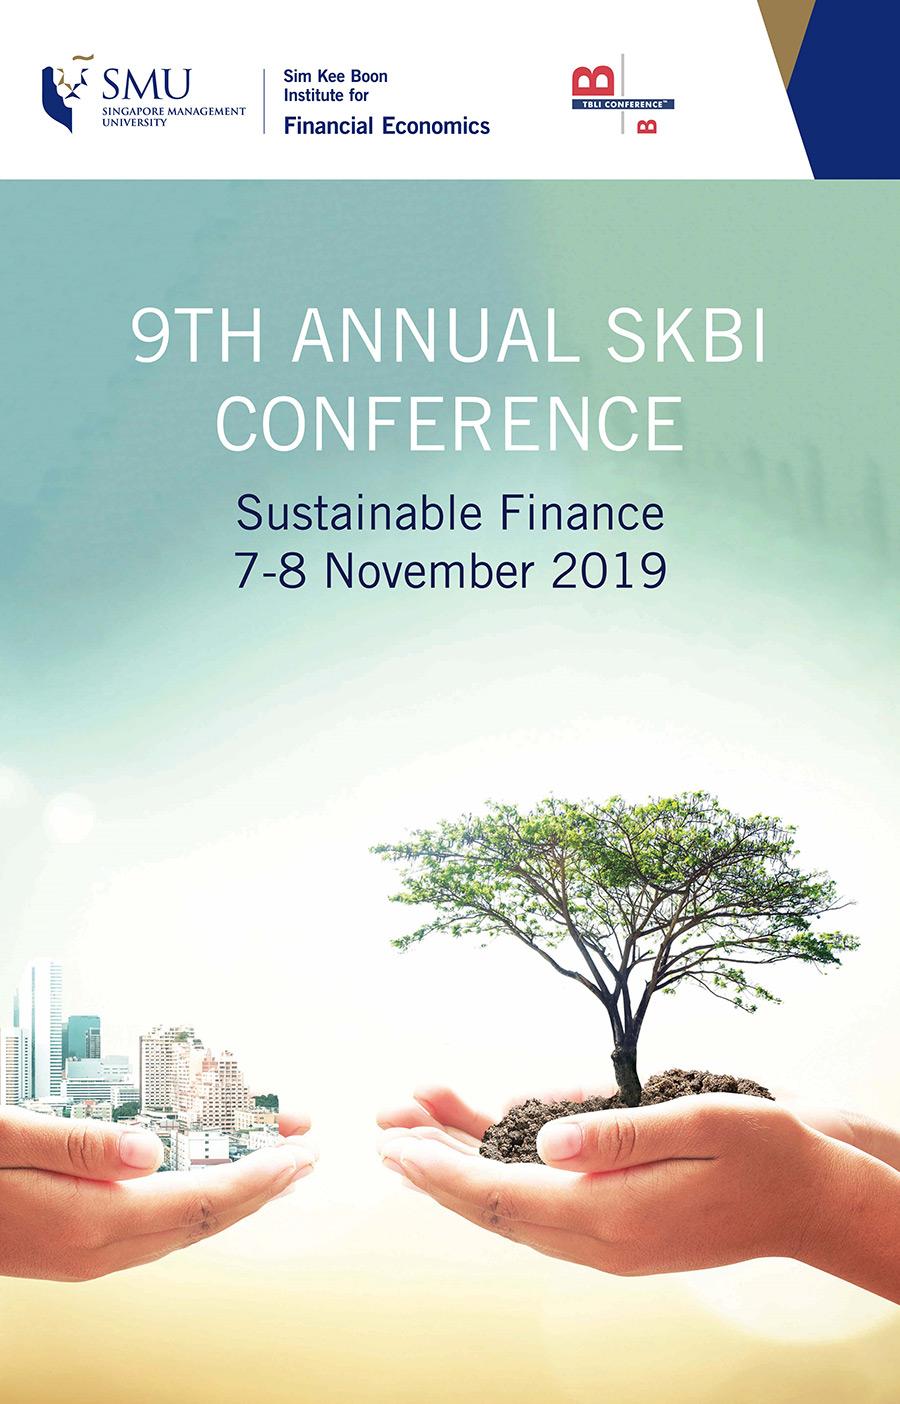 9th Annual SKBI Conference 2019 on “Sustainable Finance”